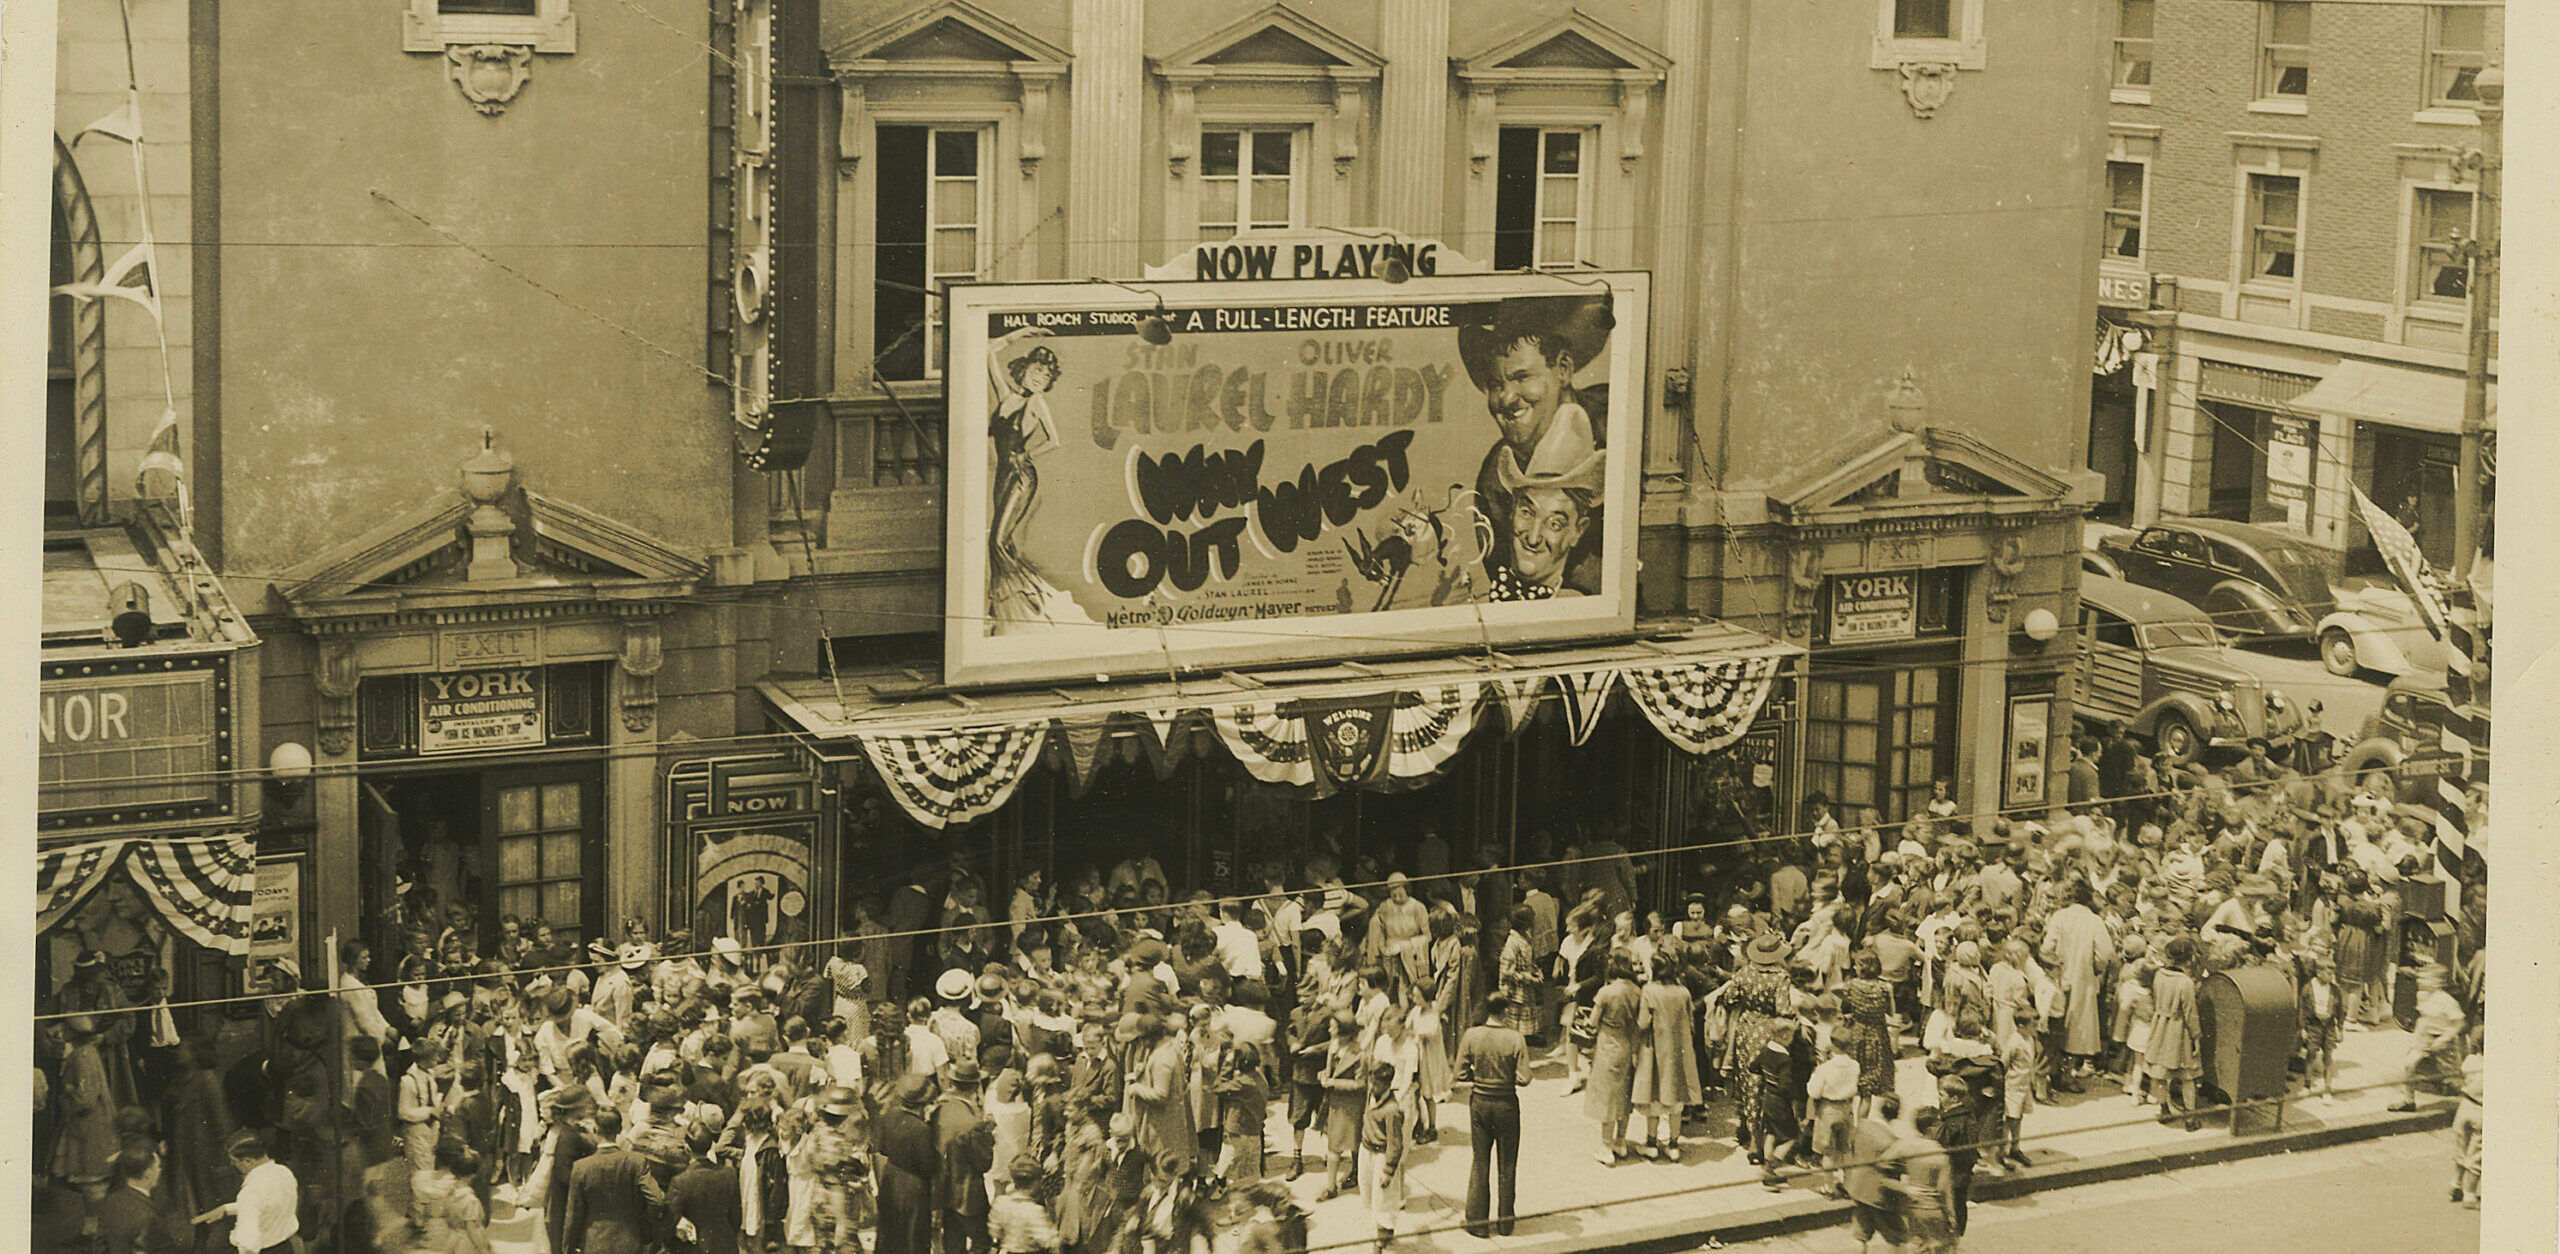 An old, sepia toned image of the Capitol Theatre. Patrons stand in front of the theatre and look at the marquis where there is a "Now Playing" poster for the movie Way Out West featuring Lauren and Hardy.